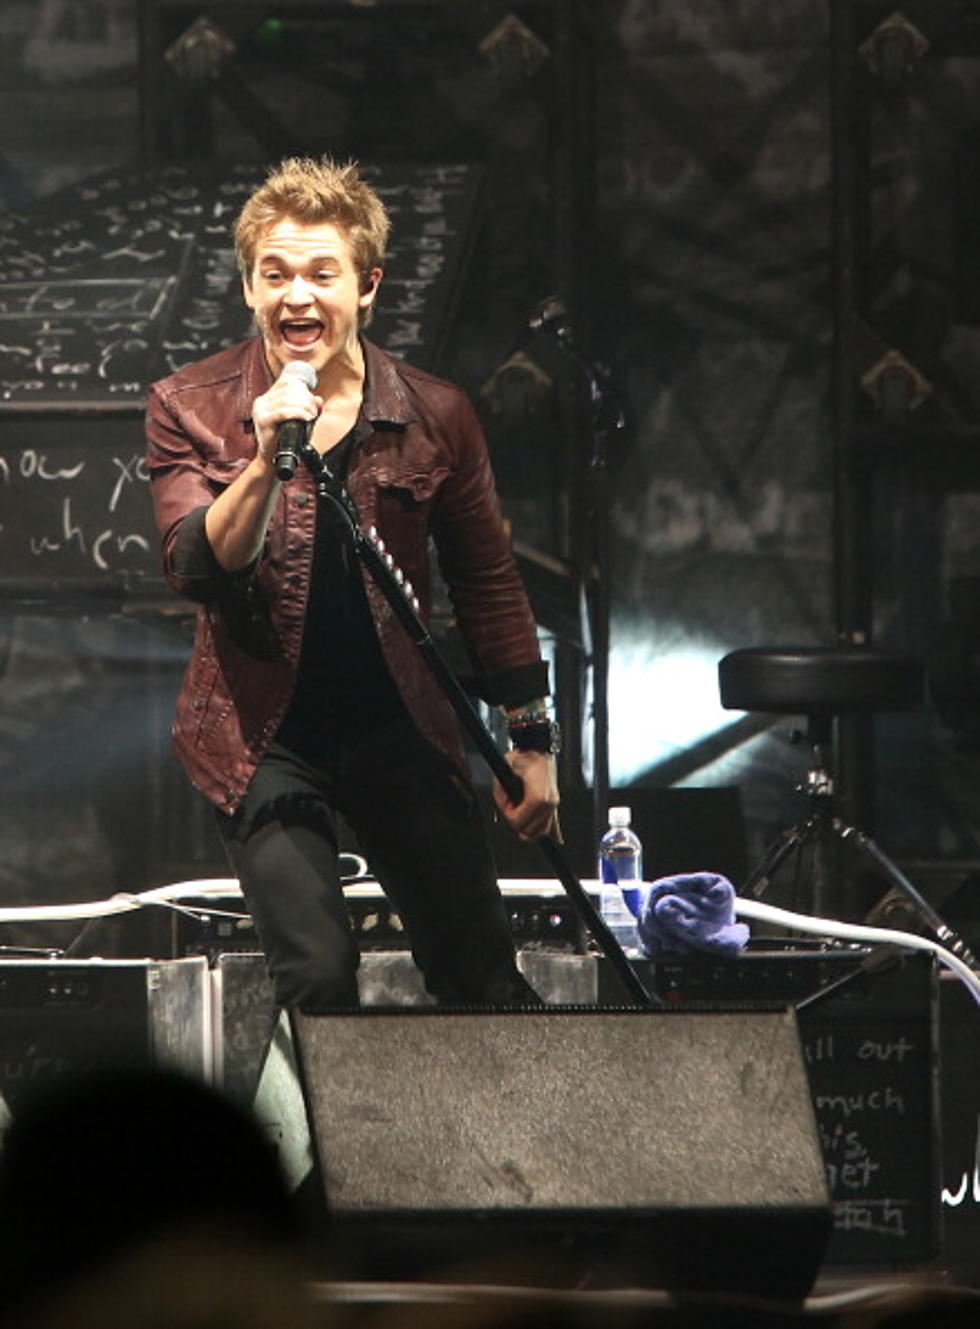 Hunter Hayes Nominated For Best Video Of The Year At CMT Awards